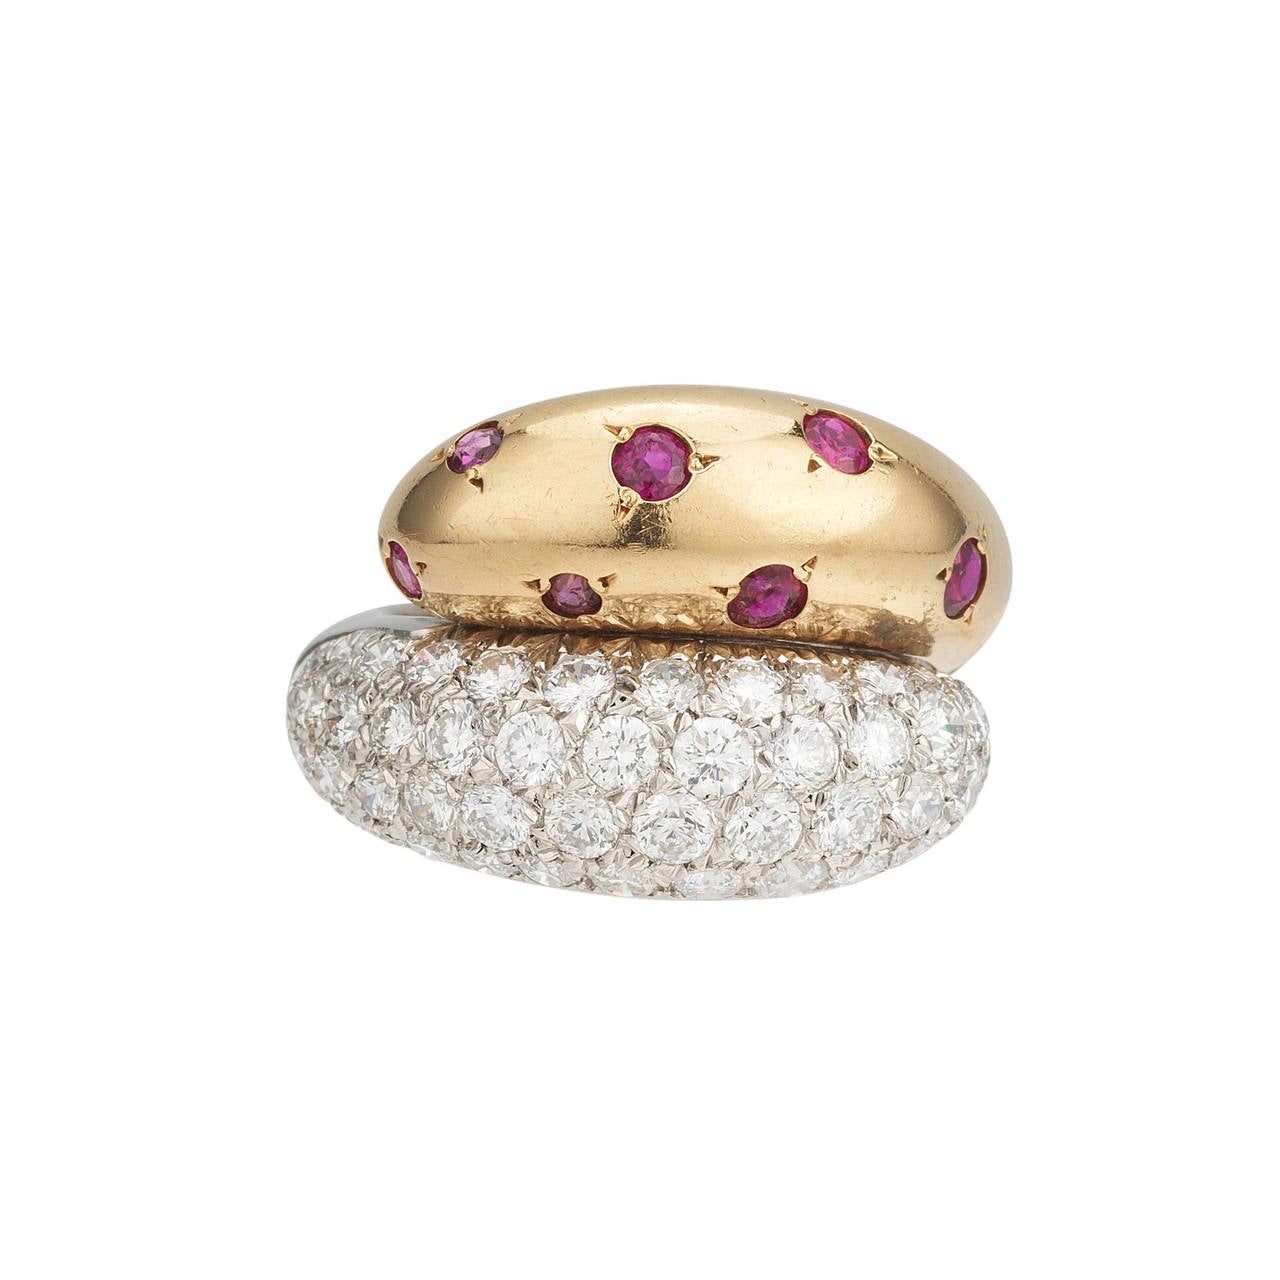 Extremely fine and Elegant Toi et Moi yellow gold, platinum, ruby and diamond ring. 

Typically Retro style, Star setting for rubies on yellow gold and round diamonds setting serti-neige style on platinum

French marks. Circa 1940.

Size: 52